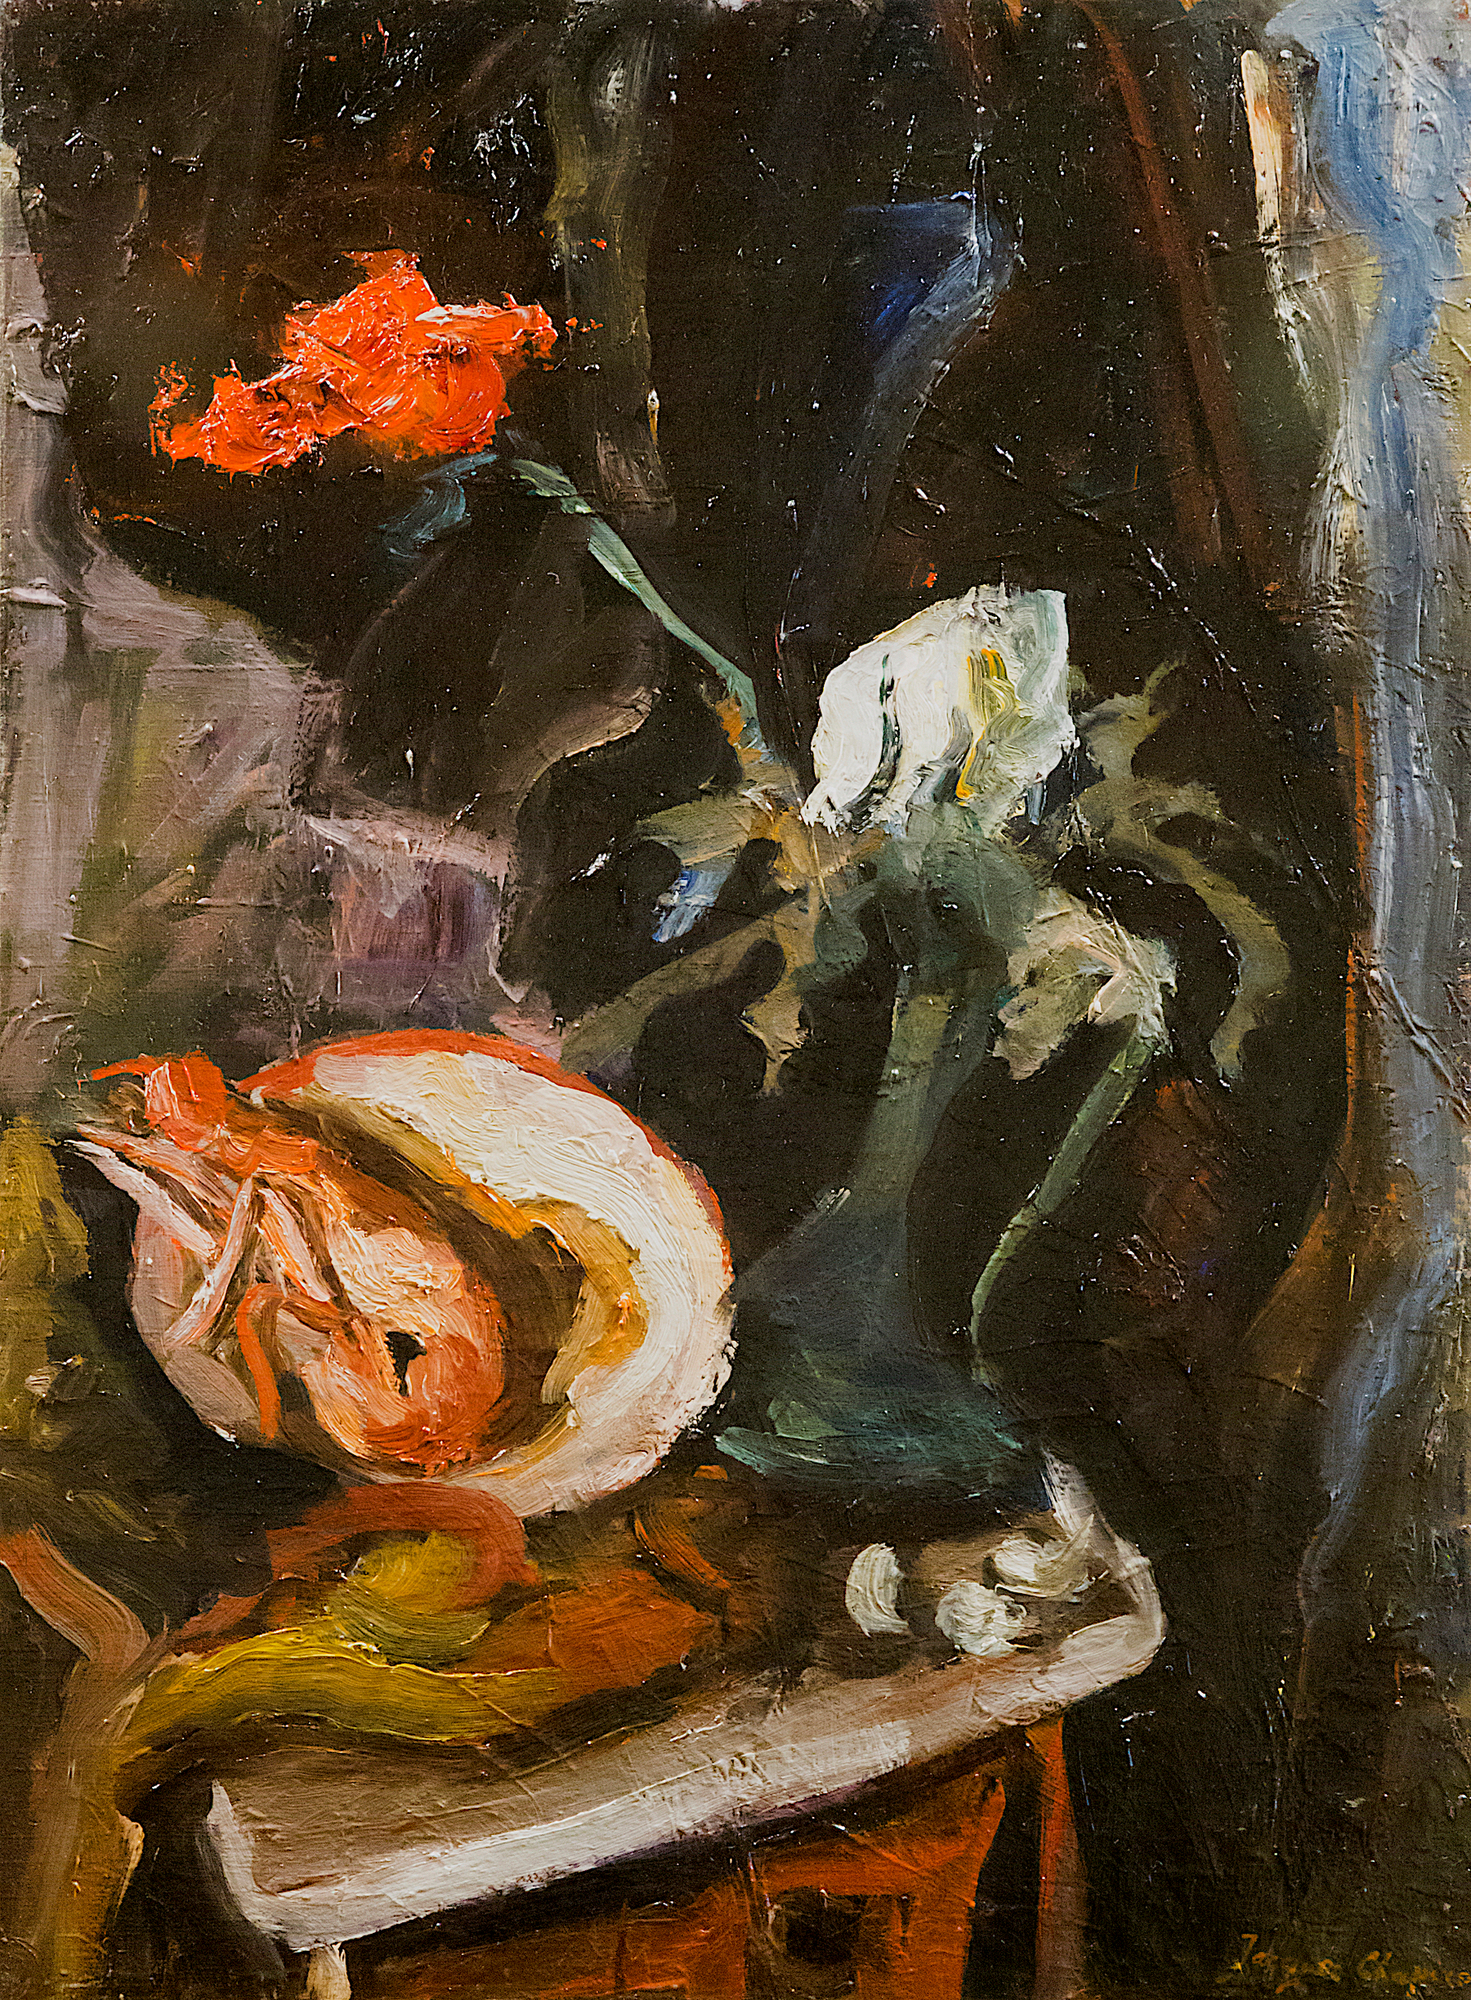 Seashell and Flowers in the Artist's Studio